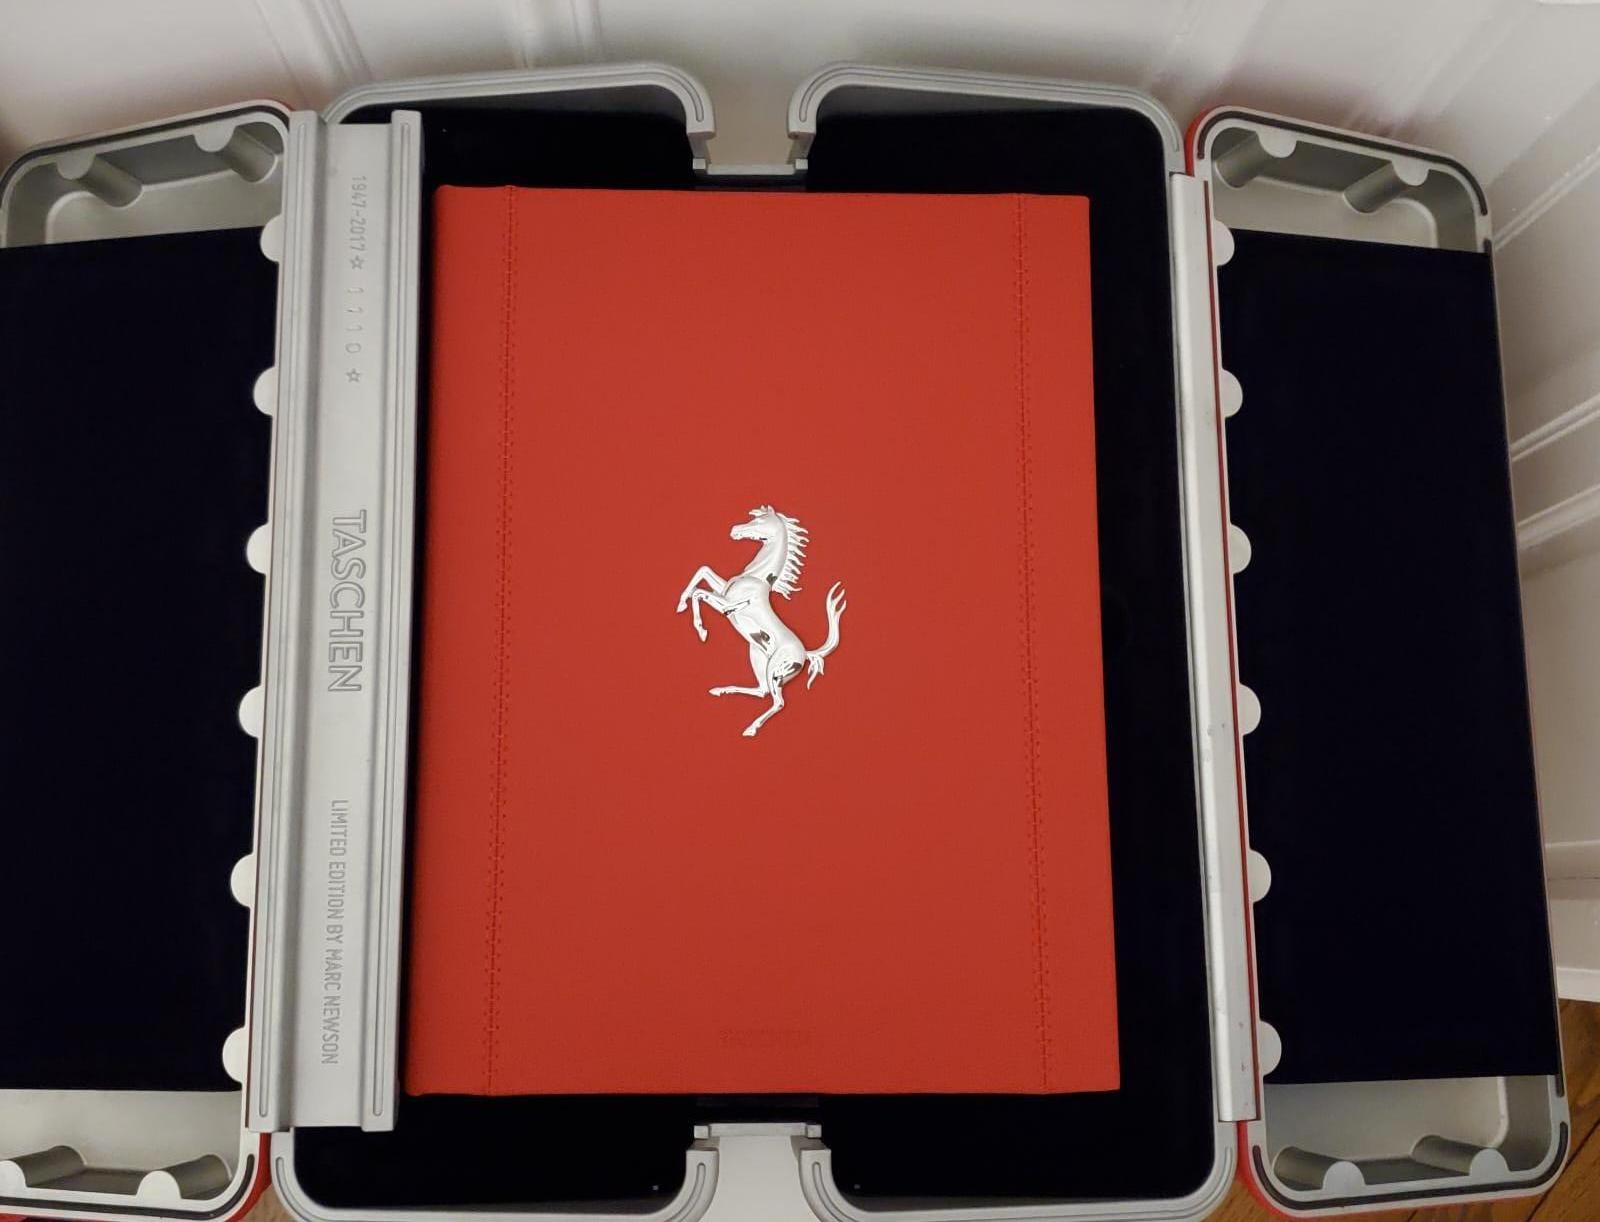 Taschen ferrari tabble book

its a wonderfull object that is imposing and bold with its Ferrari Red color
a must have for any car collector and book collector 
very beautiful and specially for the price its a steal.
the outside is made from